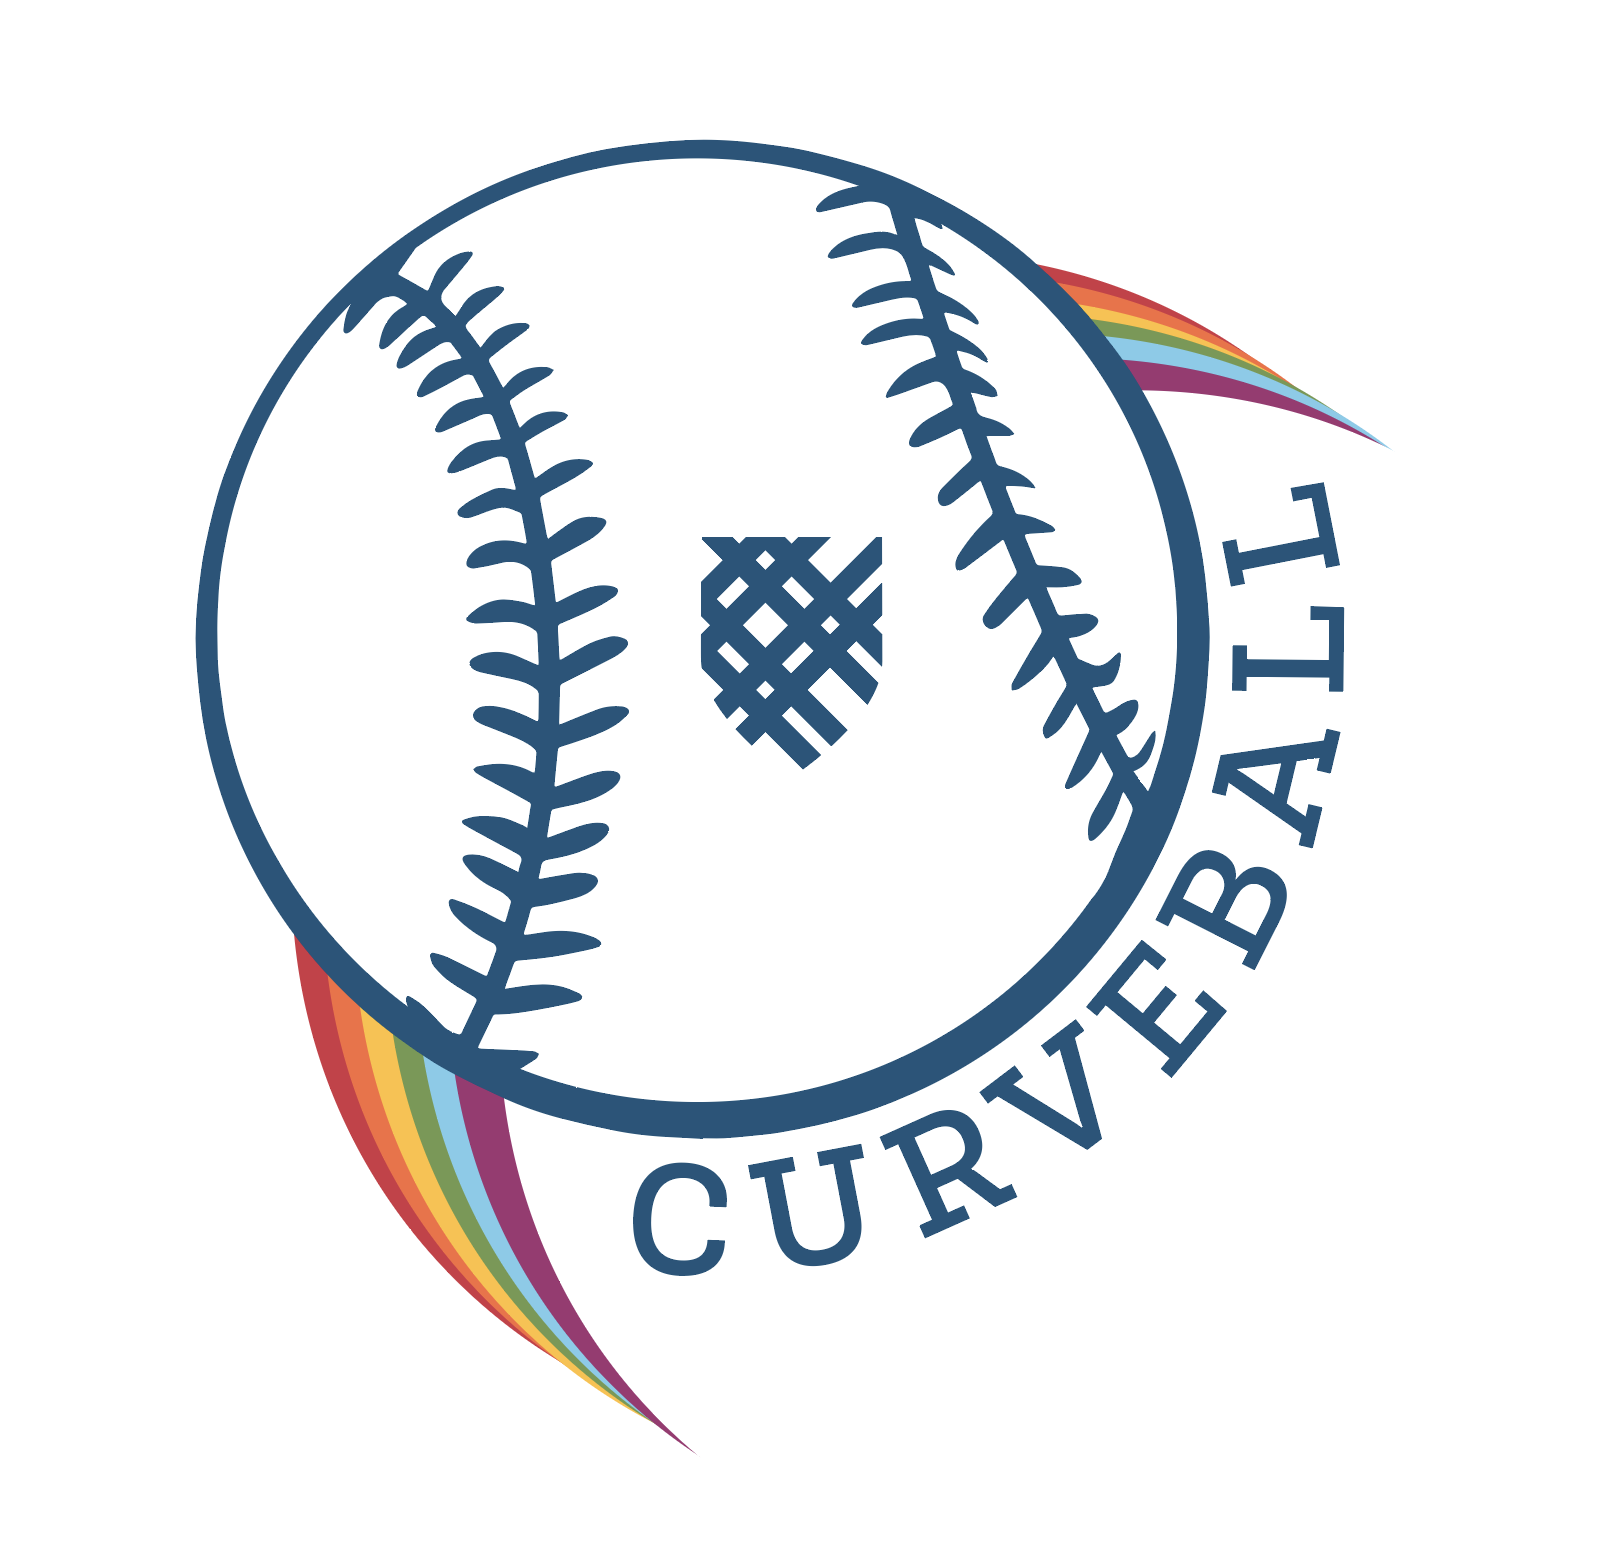 Clip art of a softball with text "Macalester" and a shield design